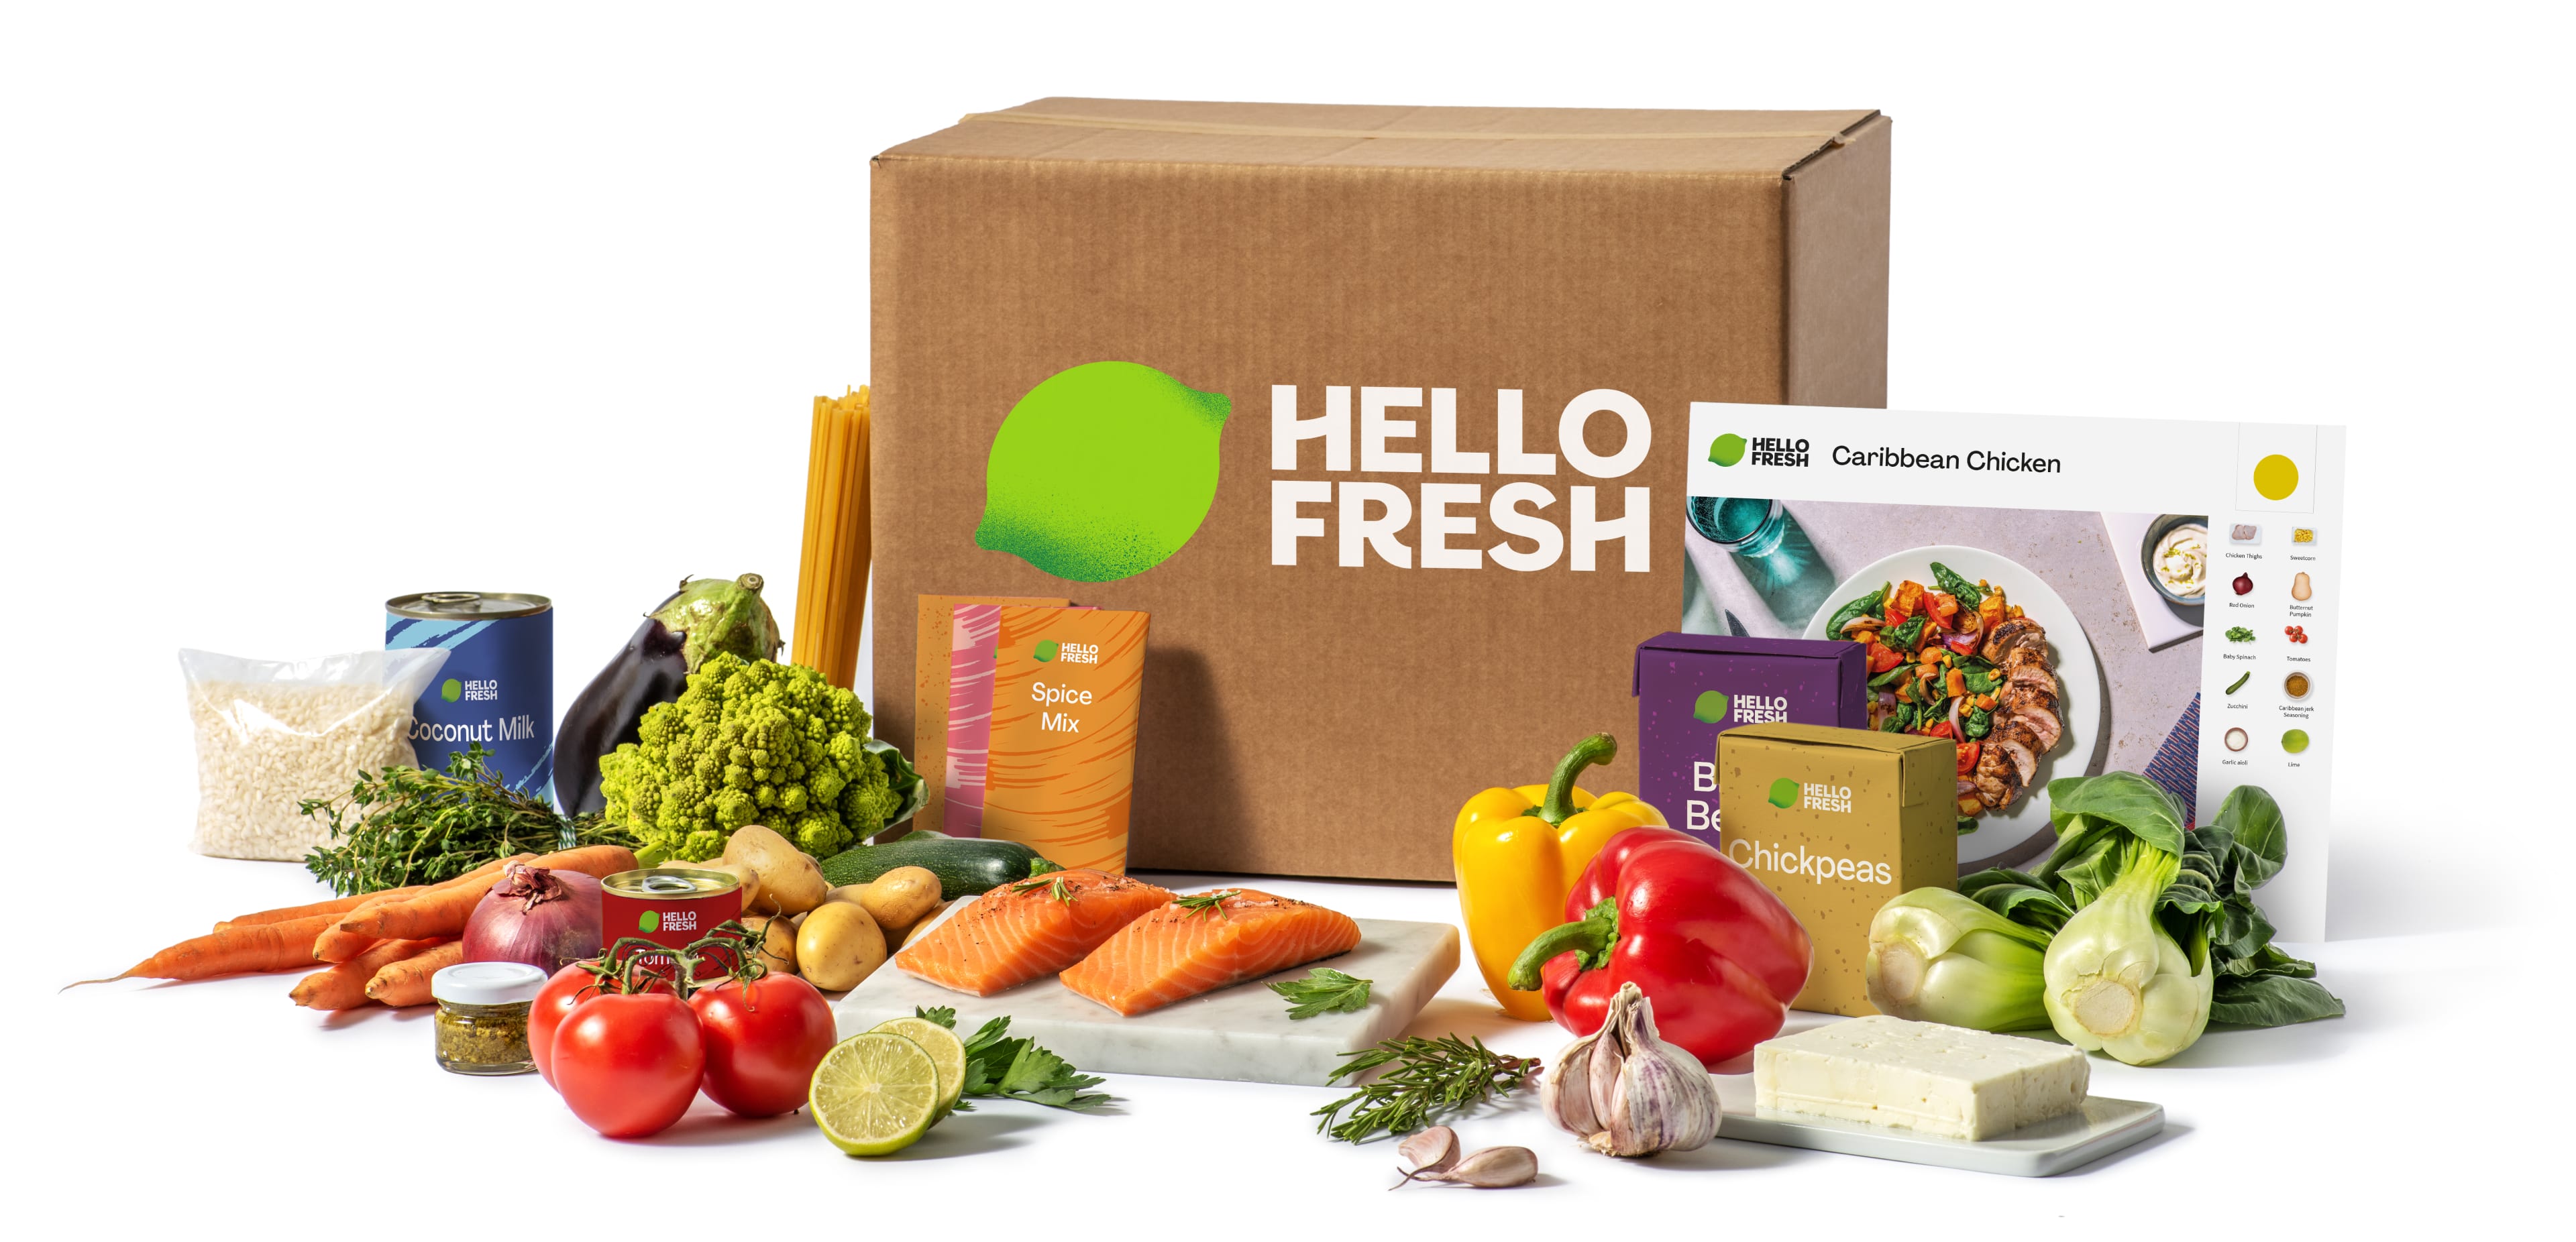 <h2>How does a healthy meal subscription work?</h2>